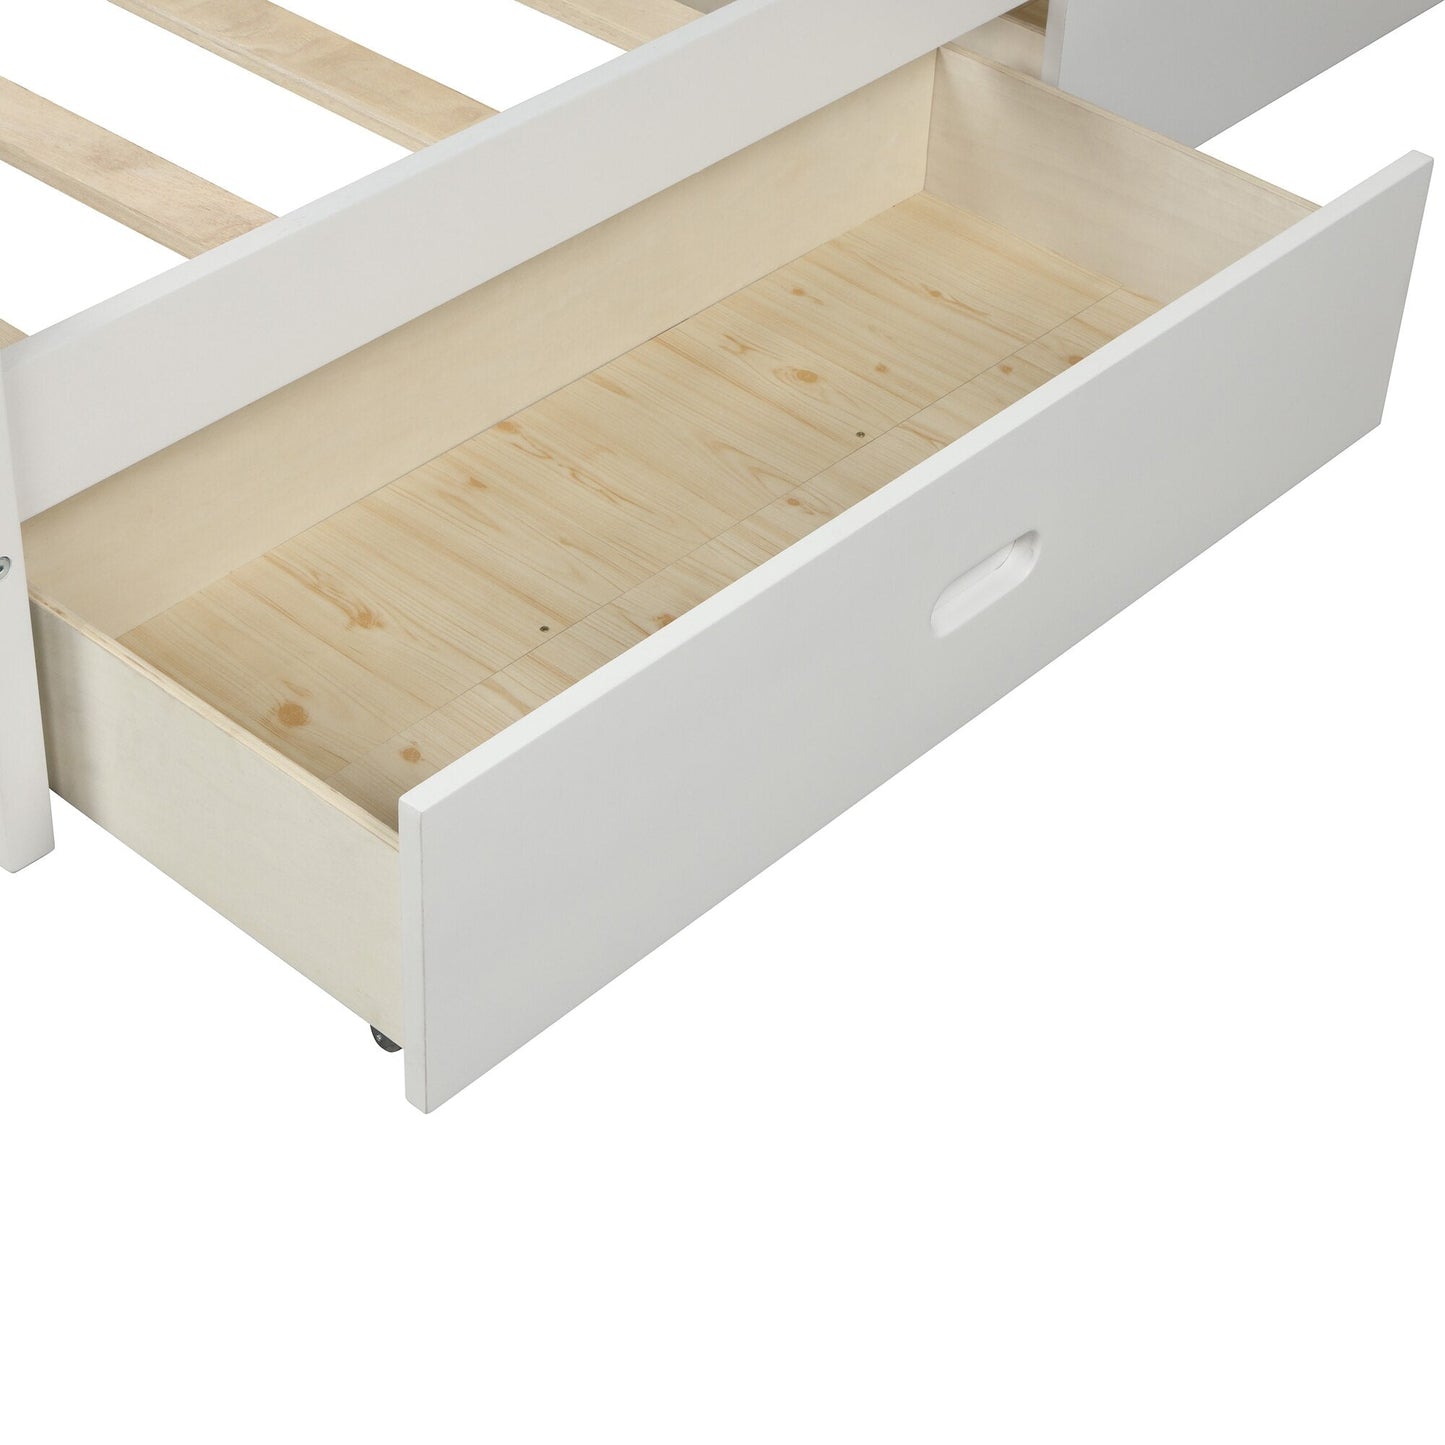 Wooden Bed Drawers